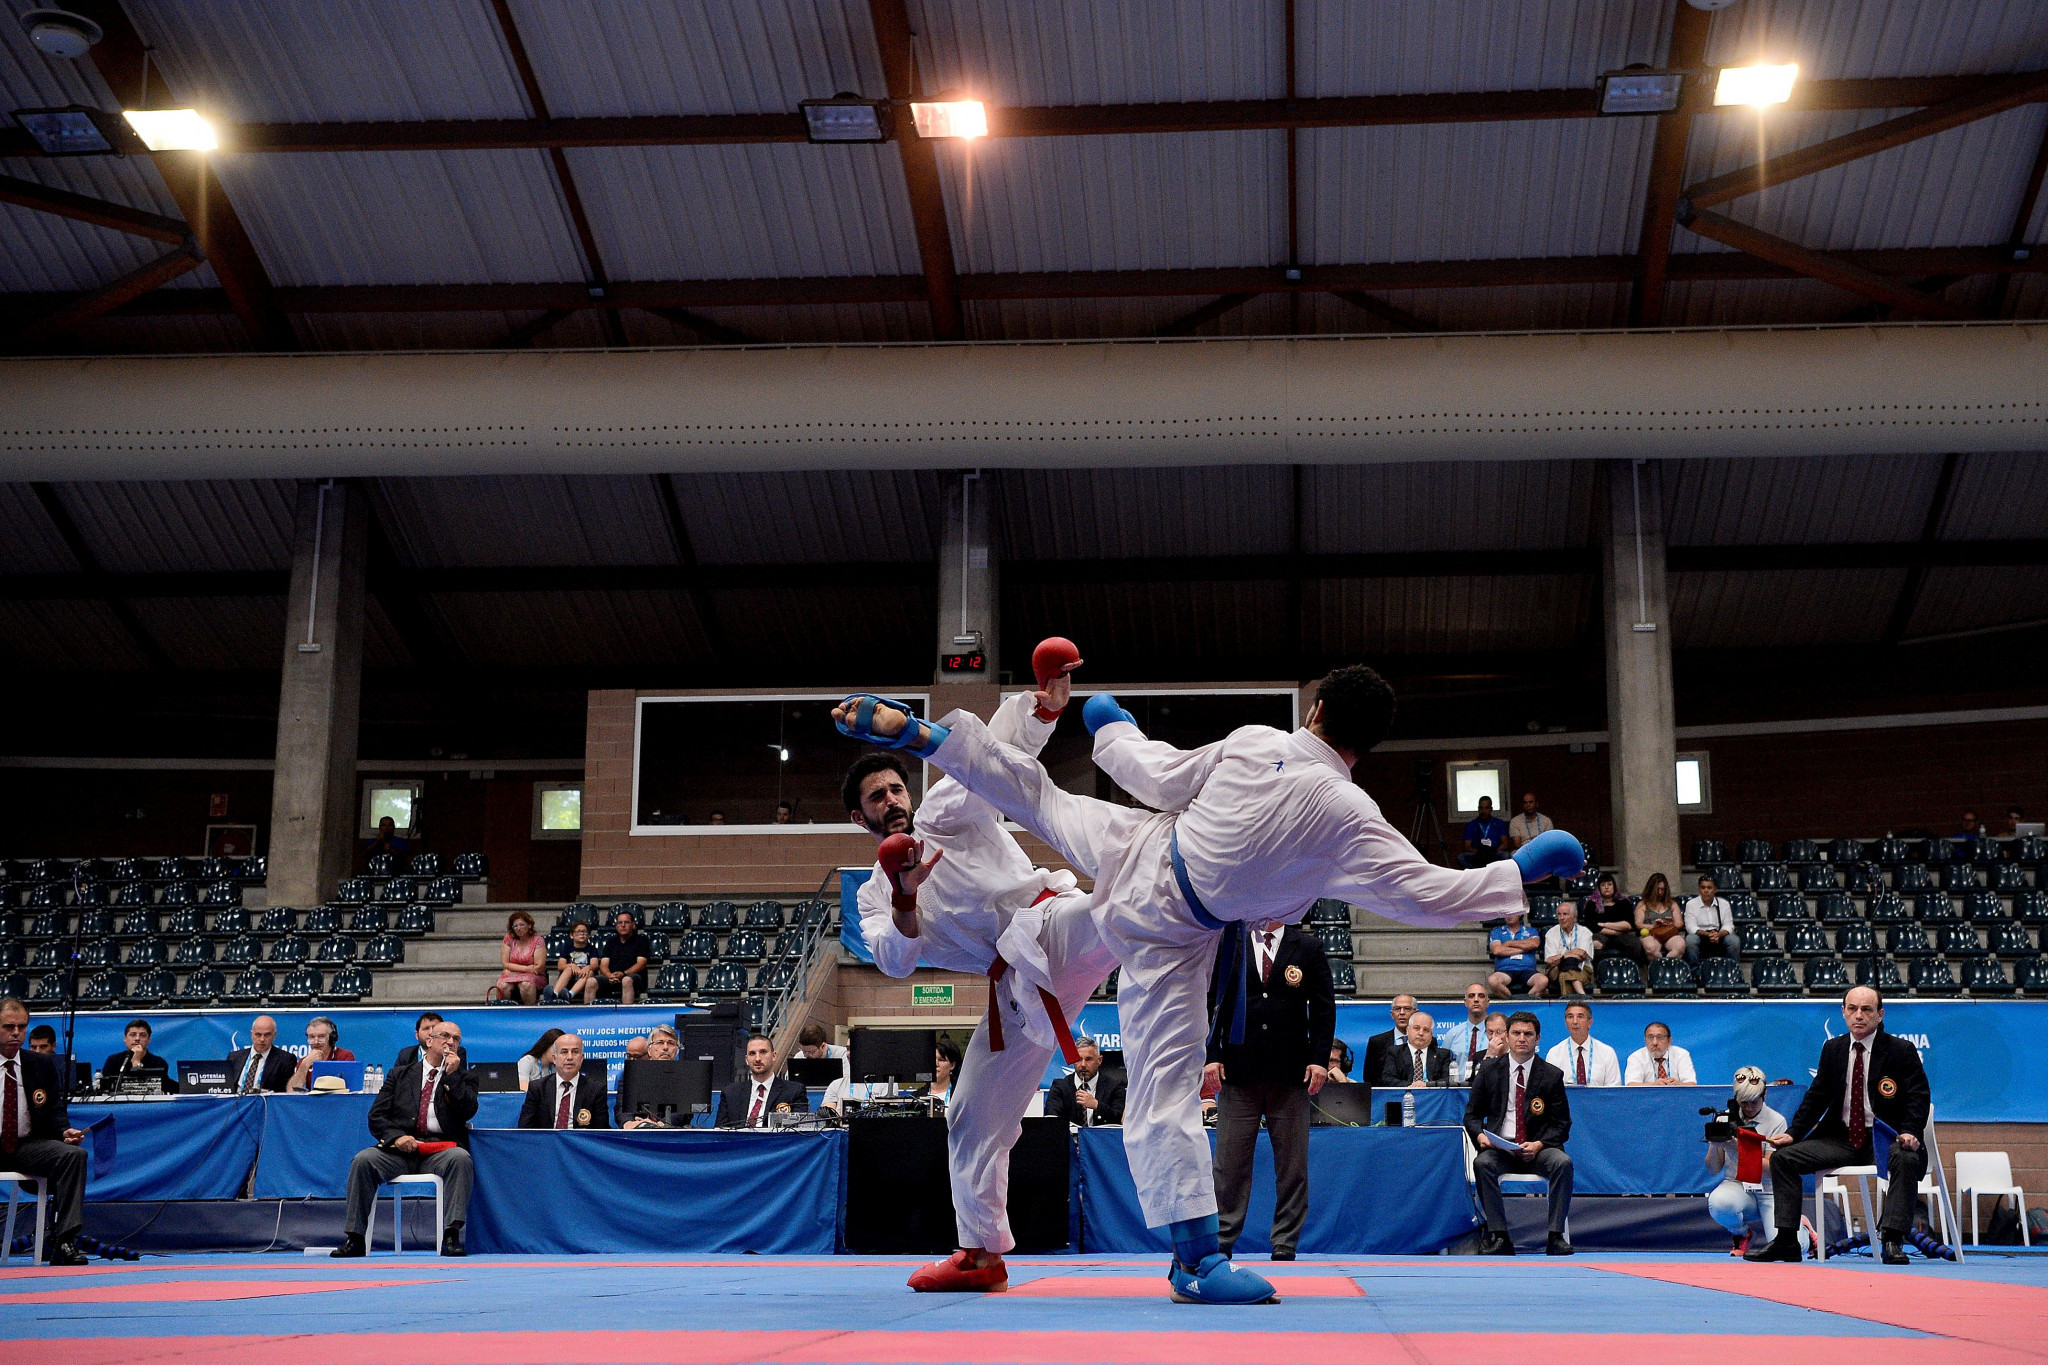 Men's karate action at the Games - the first drug failure at Tarragona came in women's competition  ©Getty Images